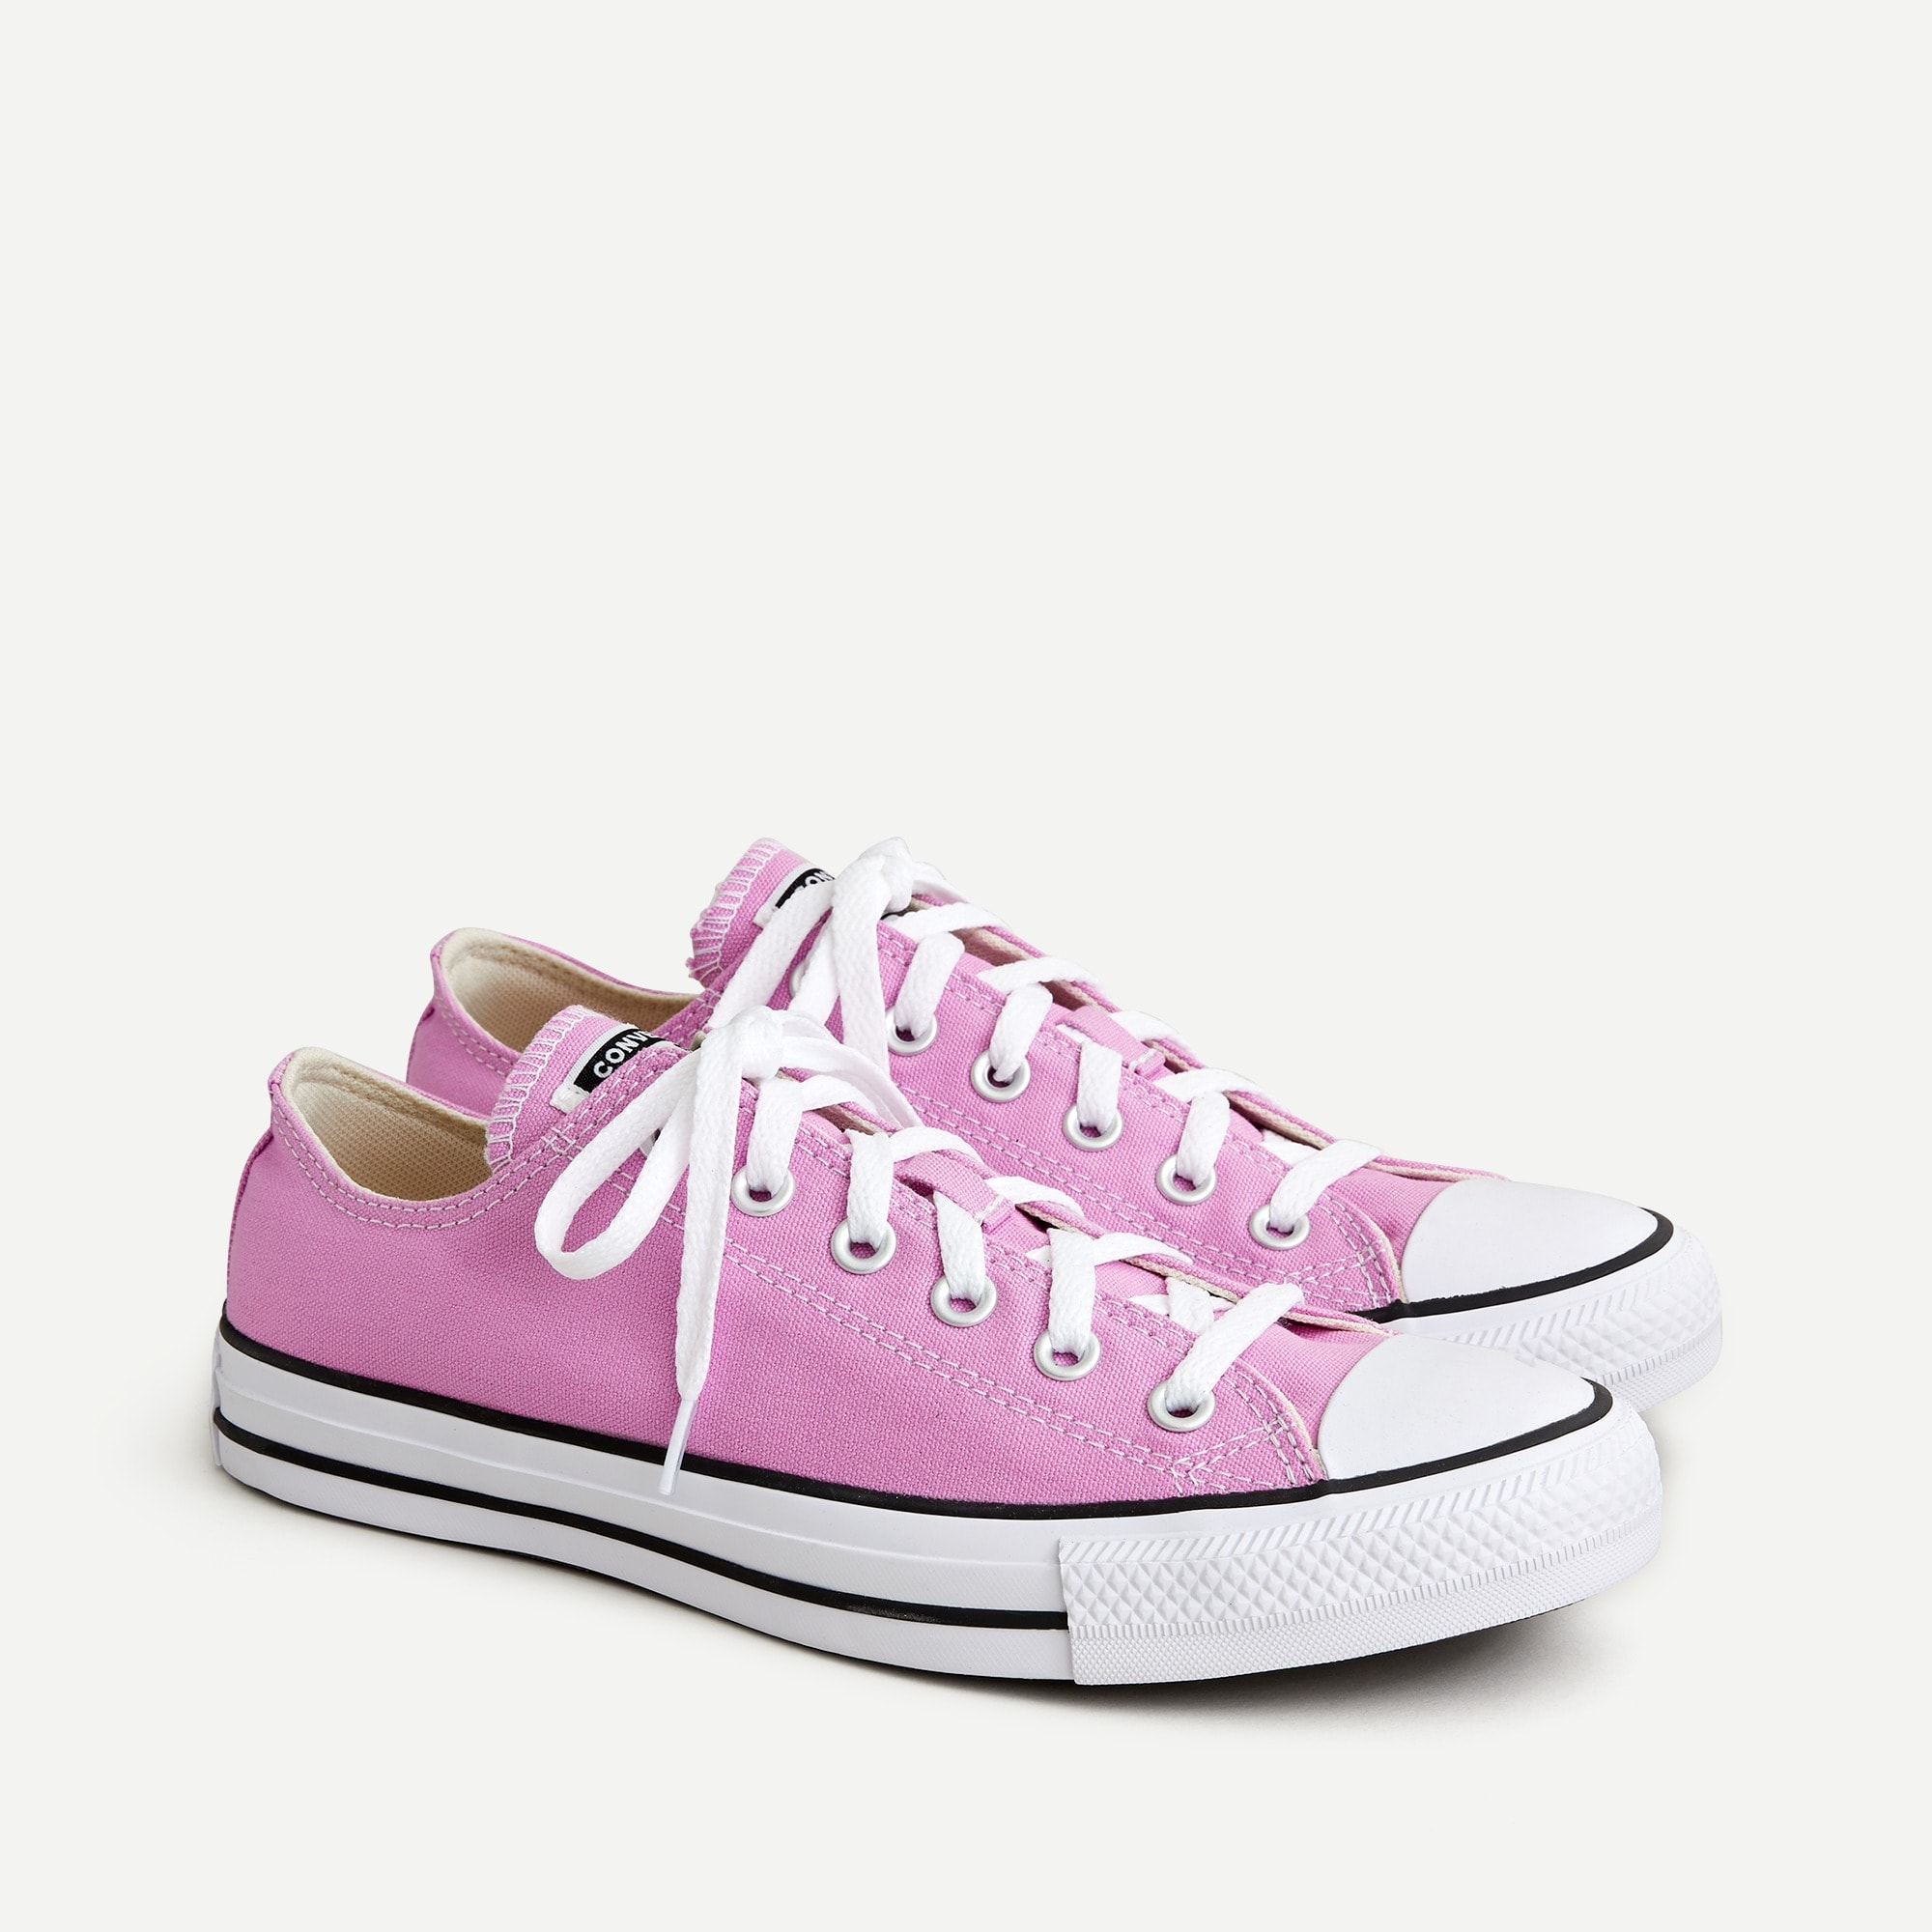 pink converse low tops womens